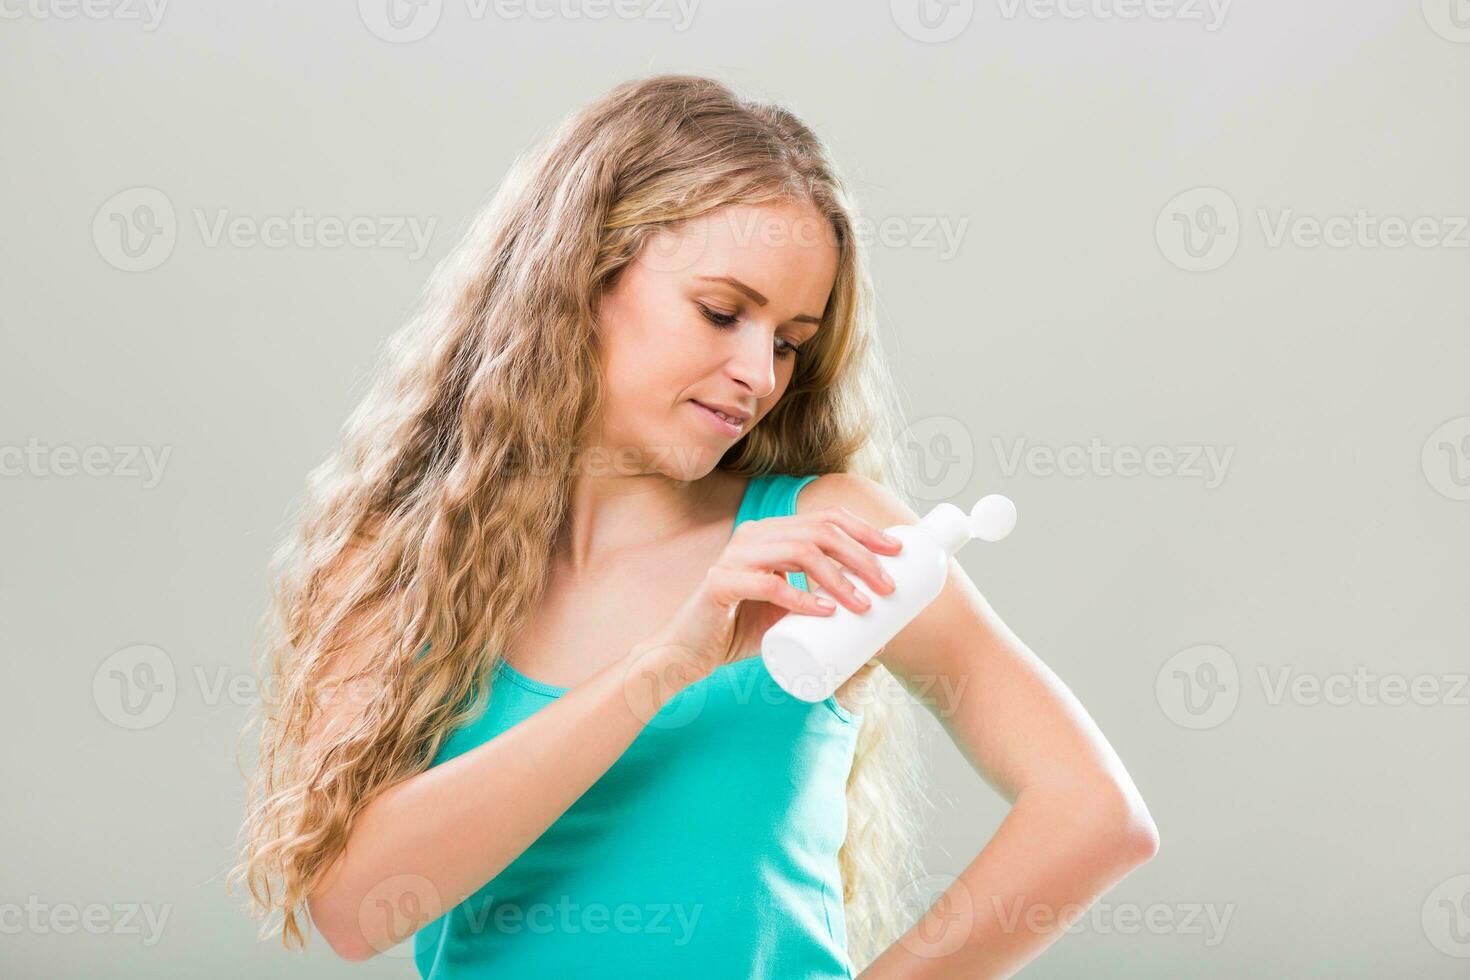 Beautiful young woman applying lotion on her arm on gray background. photo